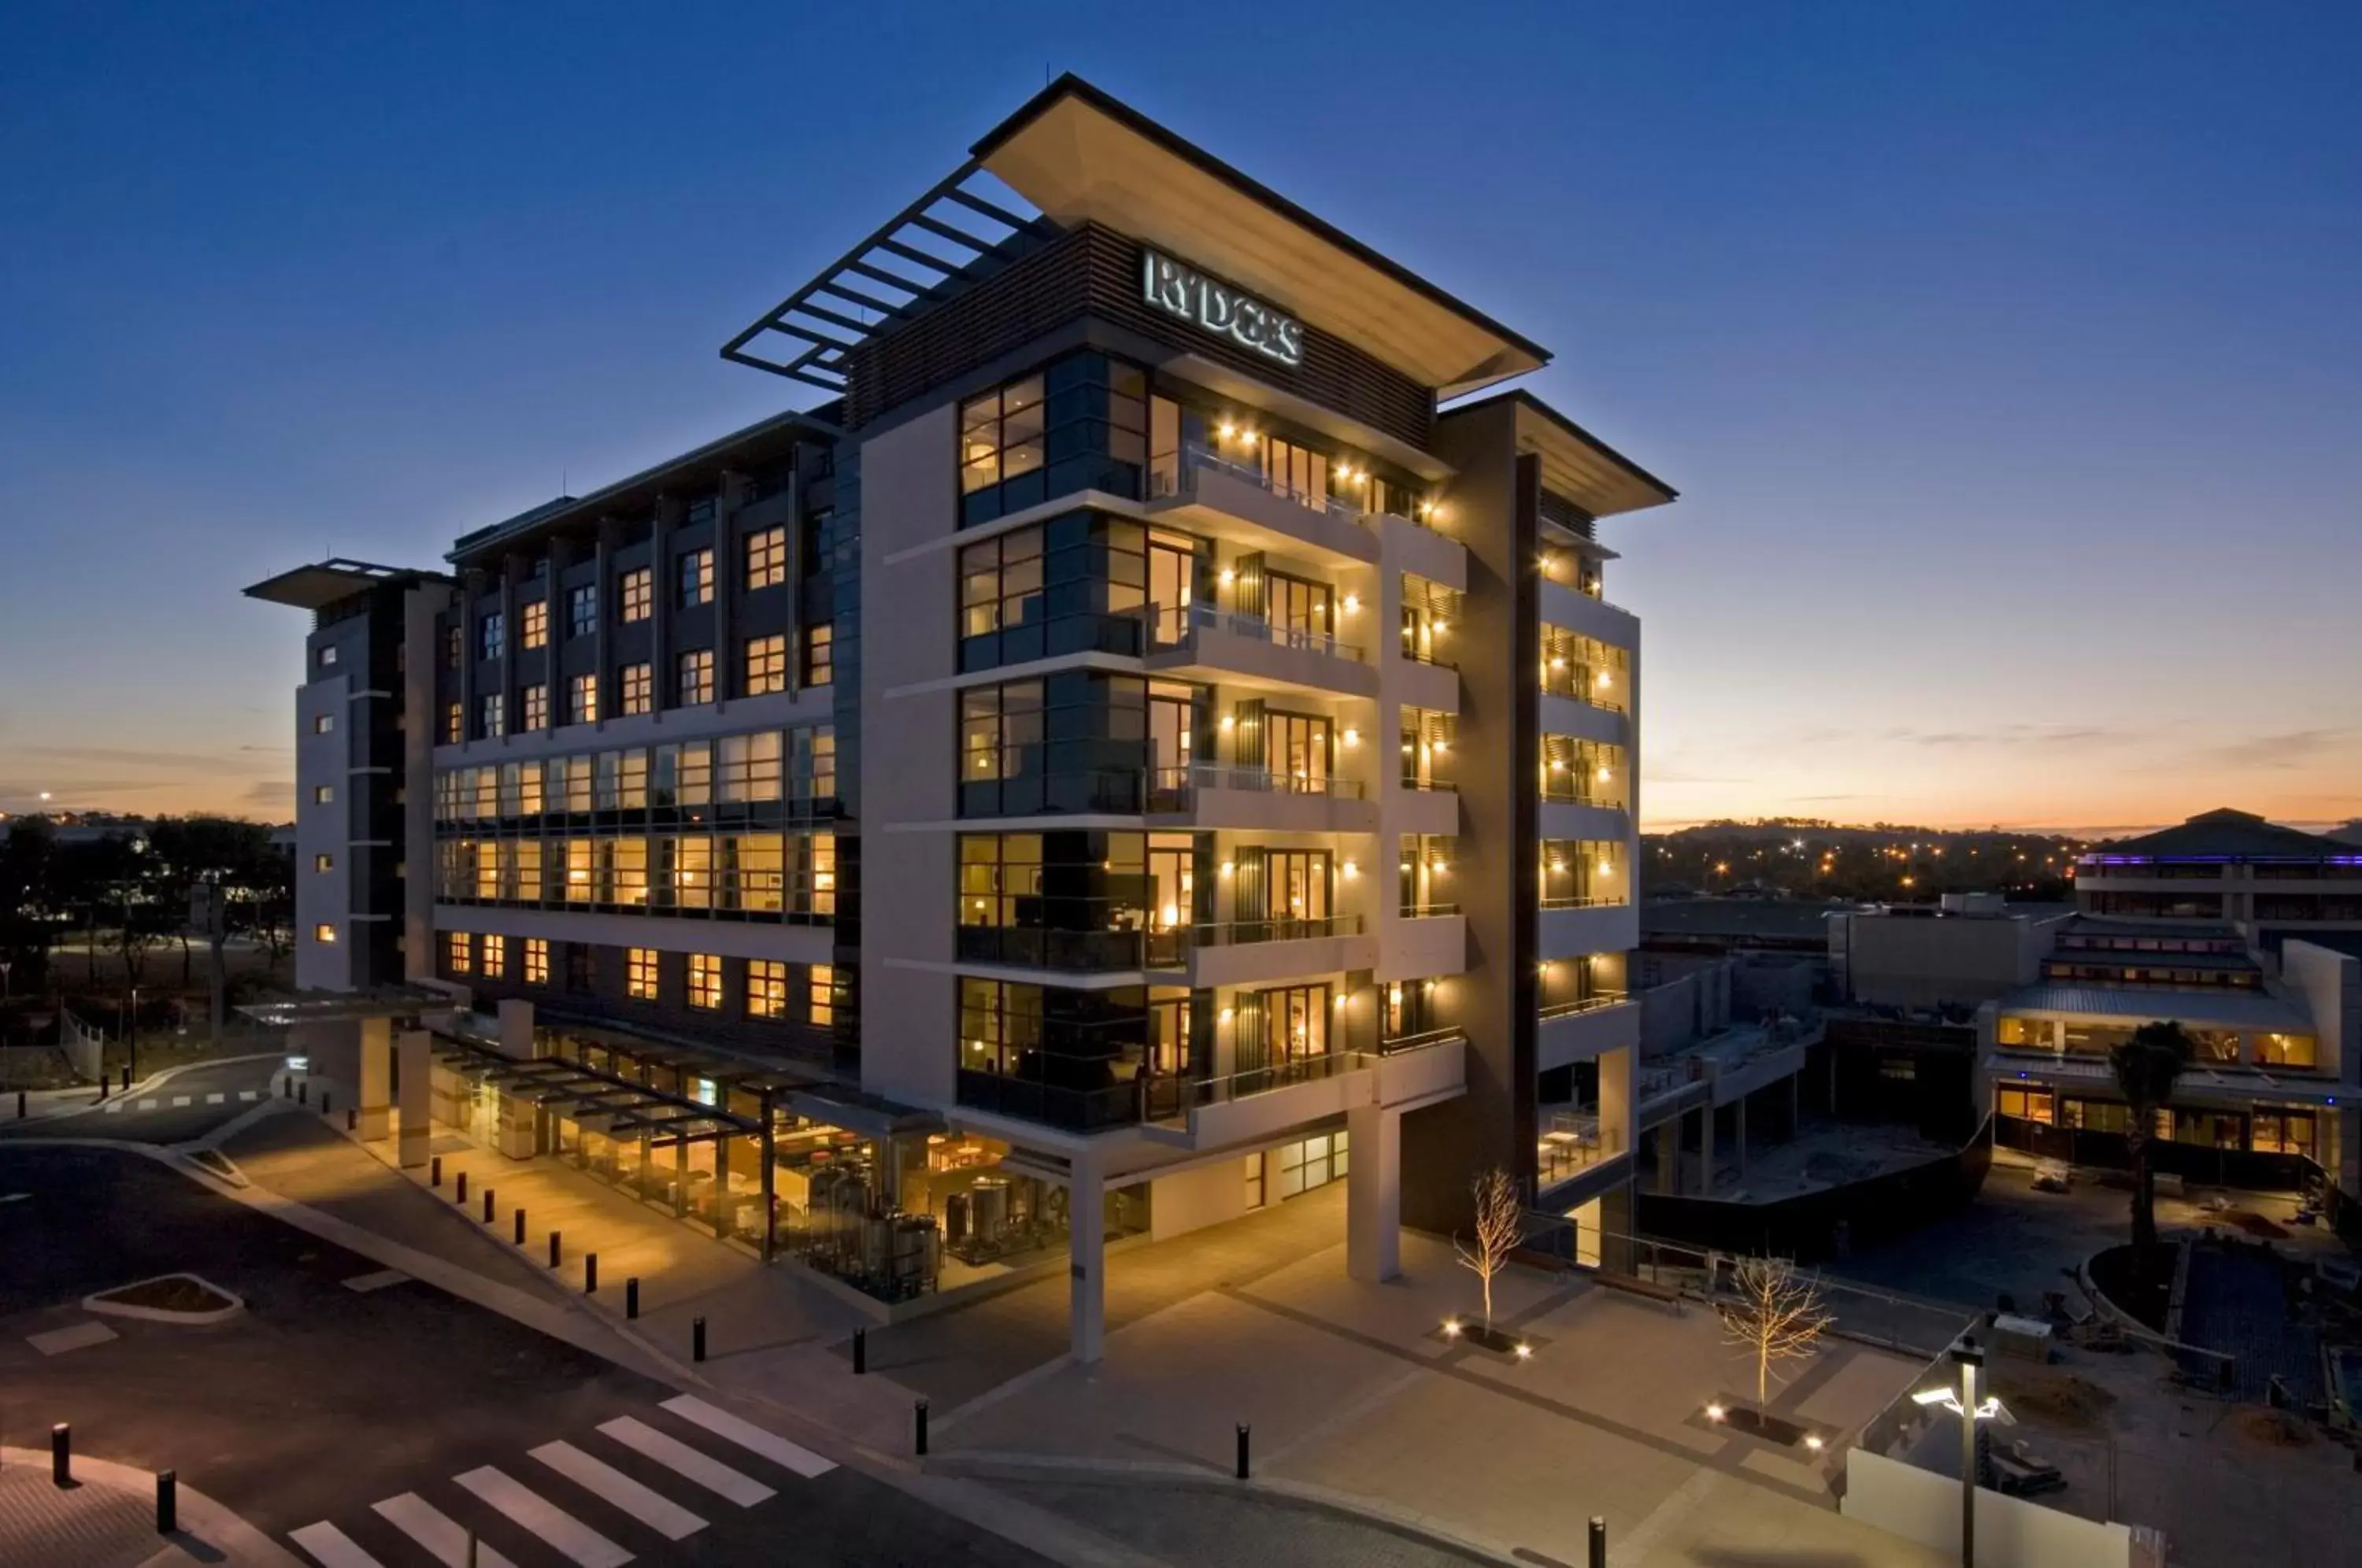 Property building in Rydges Campbelltown